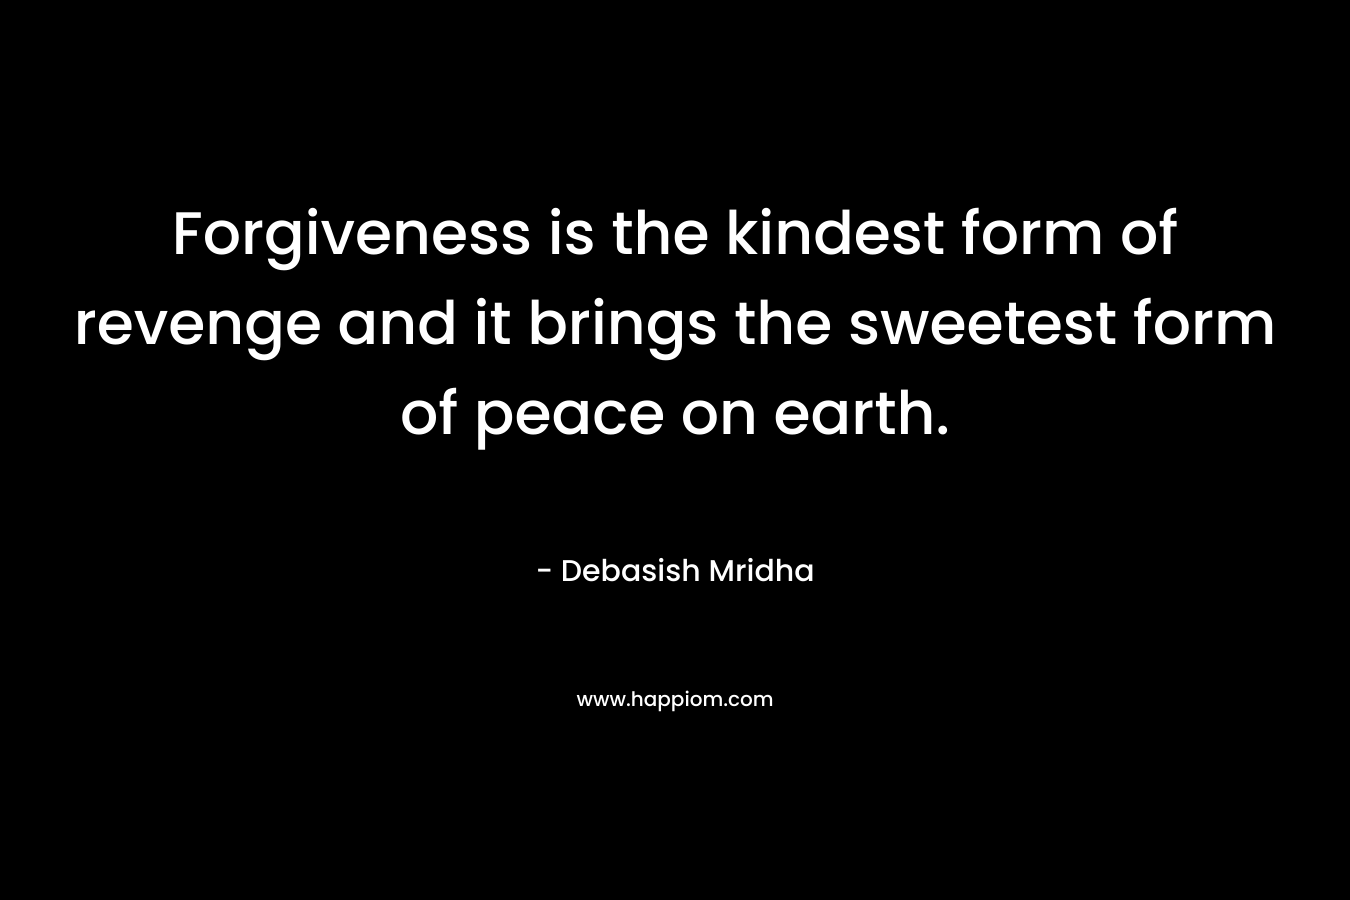 Forgiveness is the kindest form of revenge and it brings the sweetest form of peace on earth.